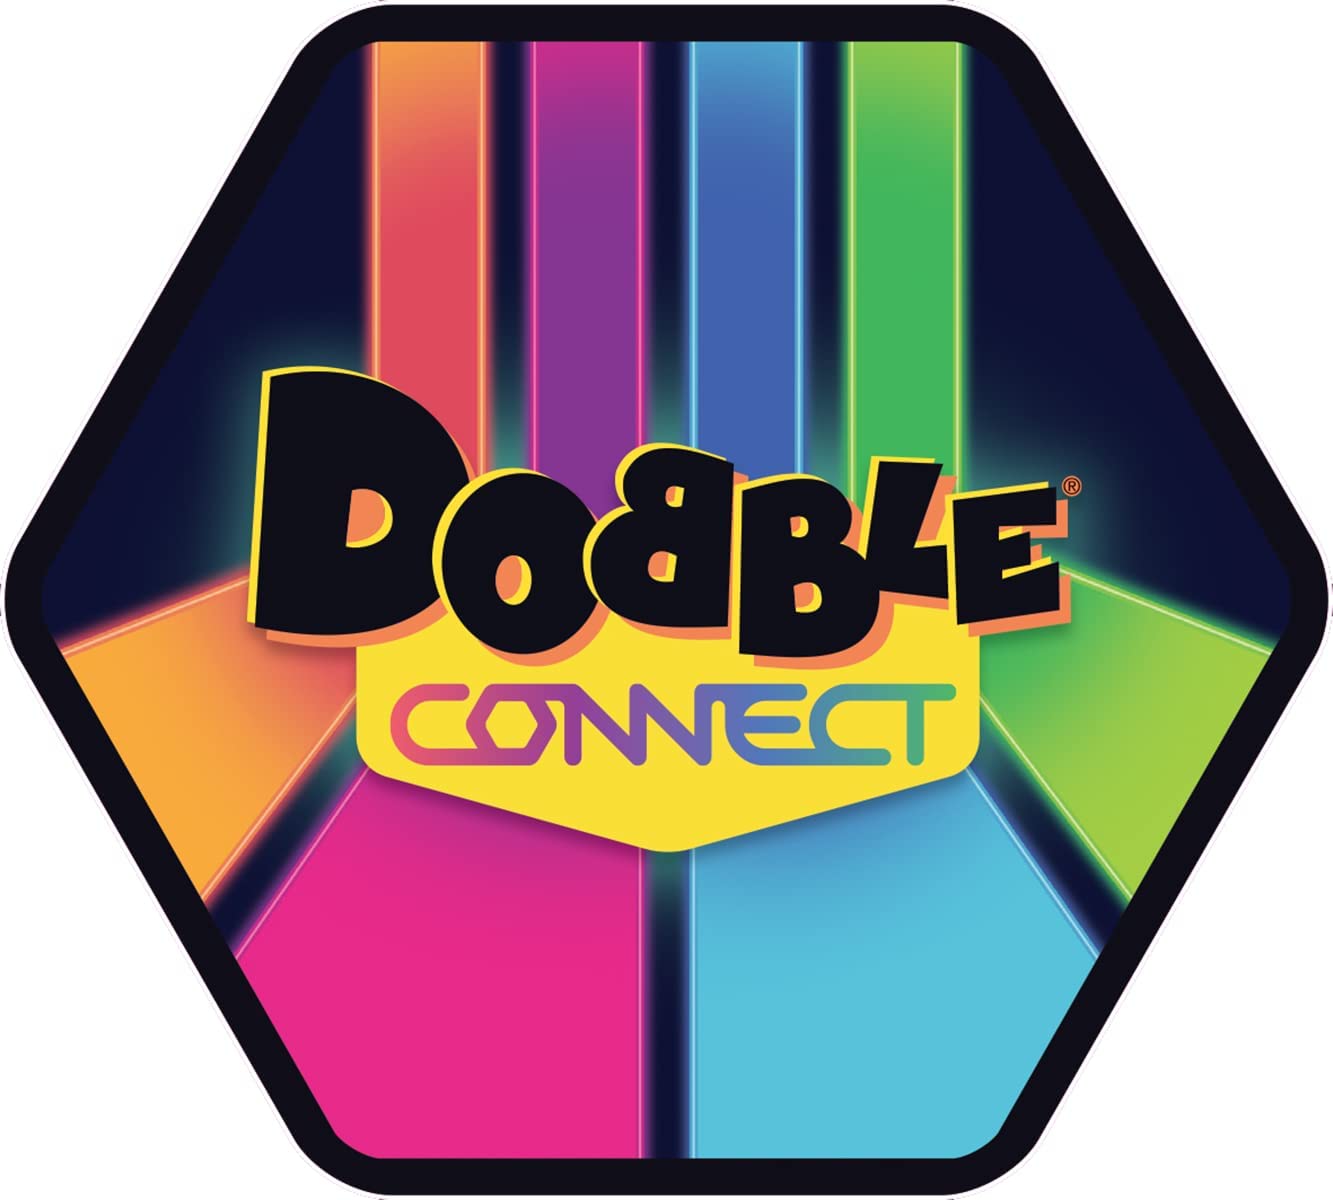 Dobble Connect Review – What's Good To Do